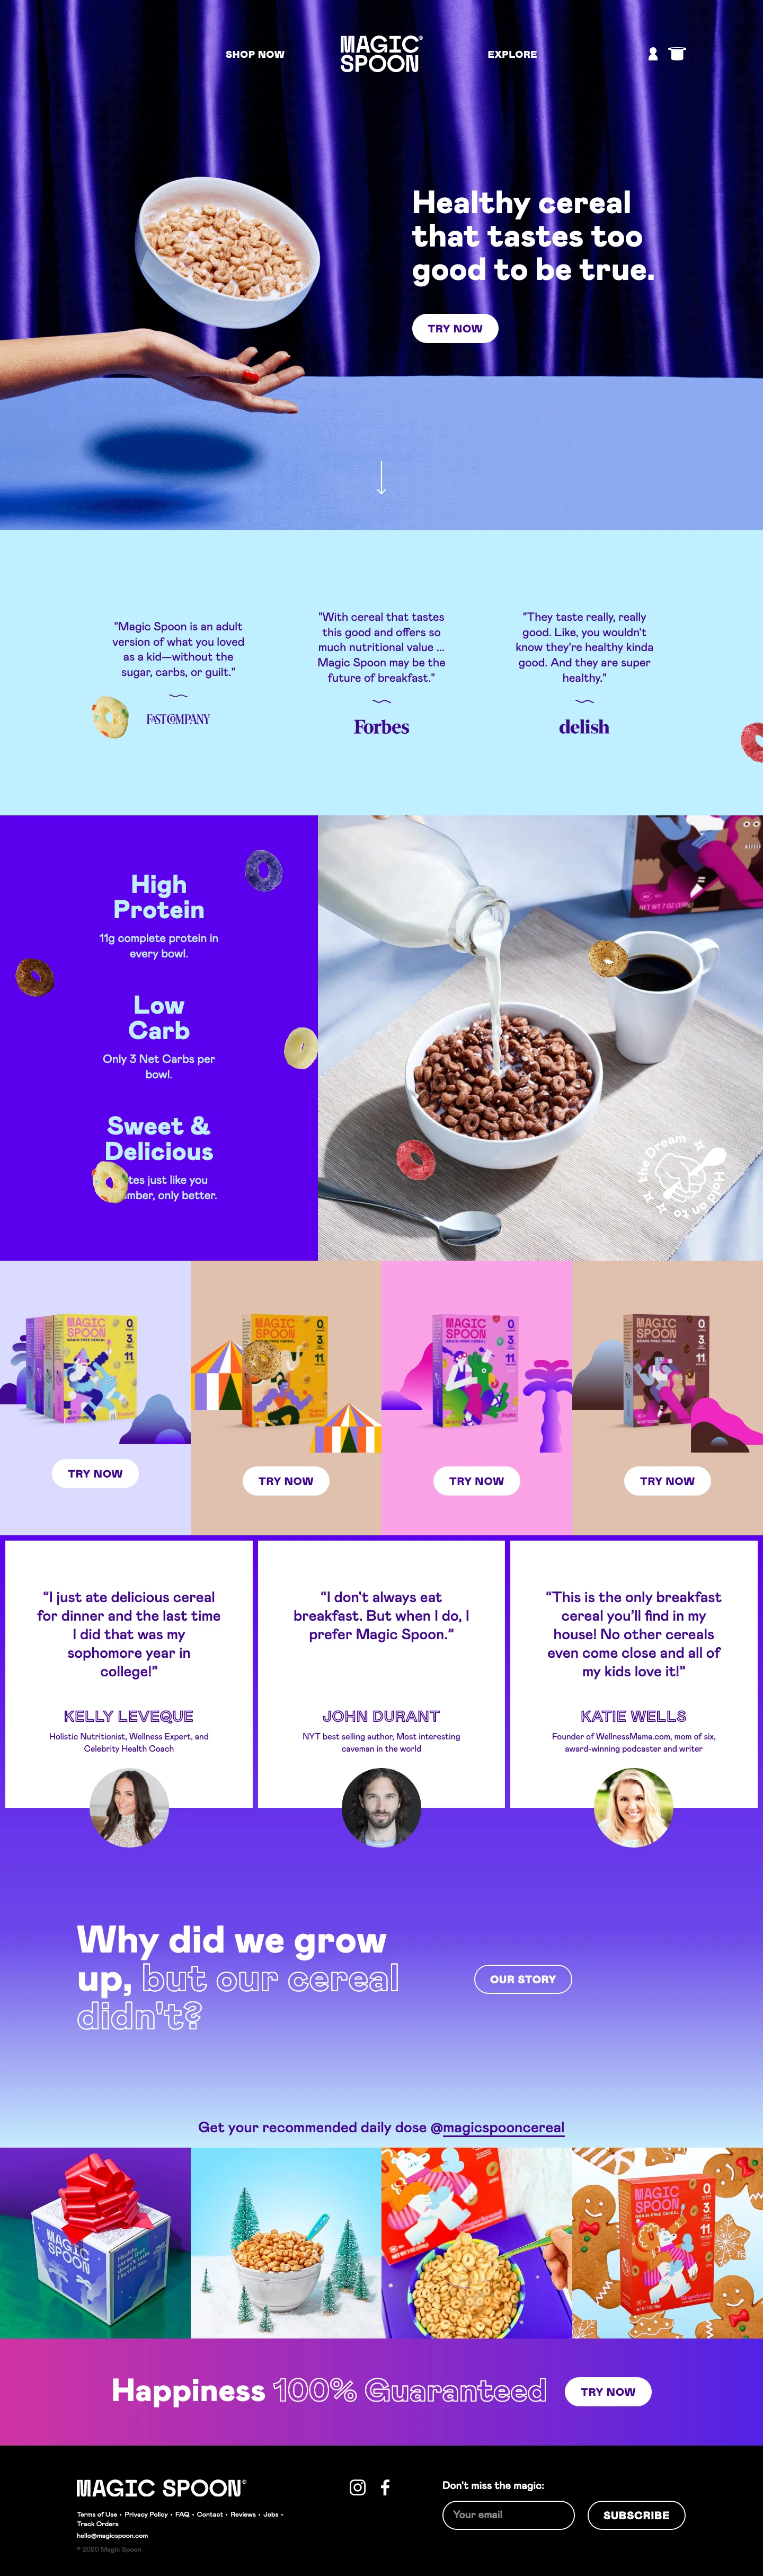 Magic Spoon Landing Page Example: Magic Spoon cereal is high-protein, low-sugar, keto-friendly, and gluten-free. Available in Cocoa, Frosted, Fruity, Blueberry, Peanut Butter, and Cinnamon.